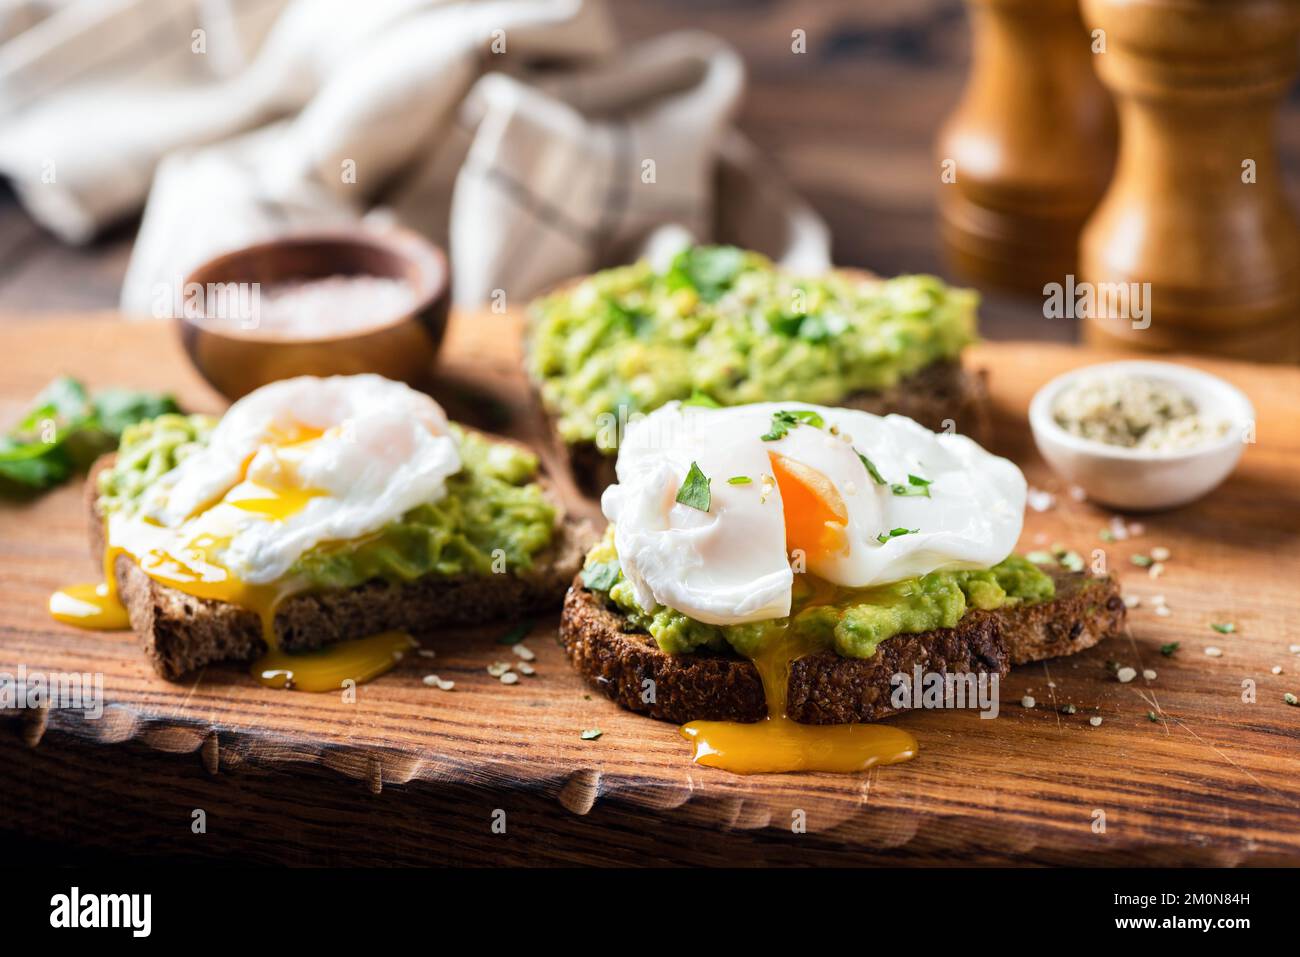 Rye toast with mashed avocado and poached egg on wooden board, closeup view. Healthy breakfast avocado toast Stock Photo